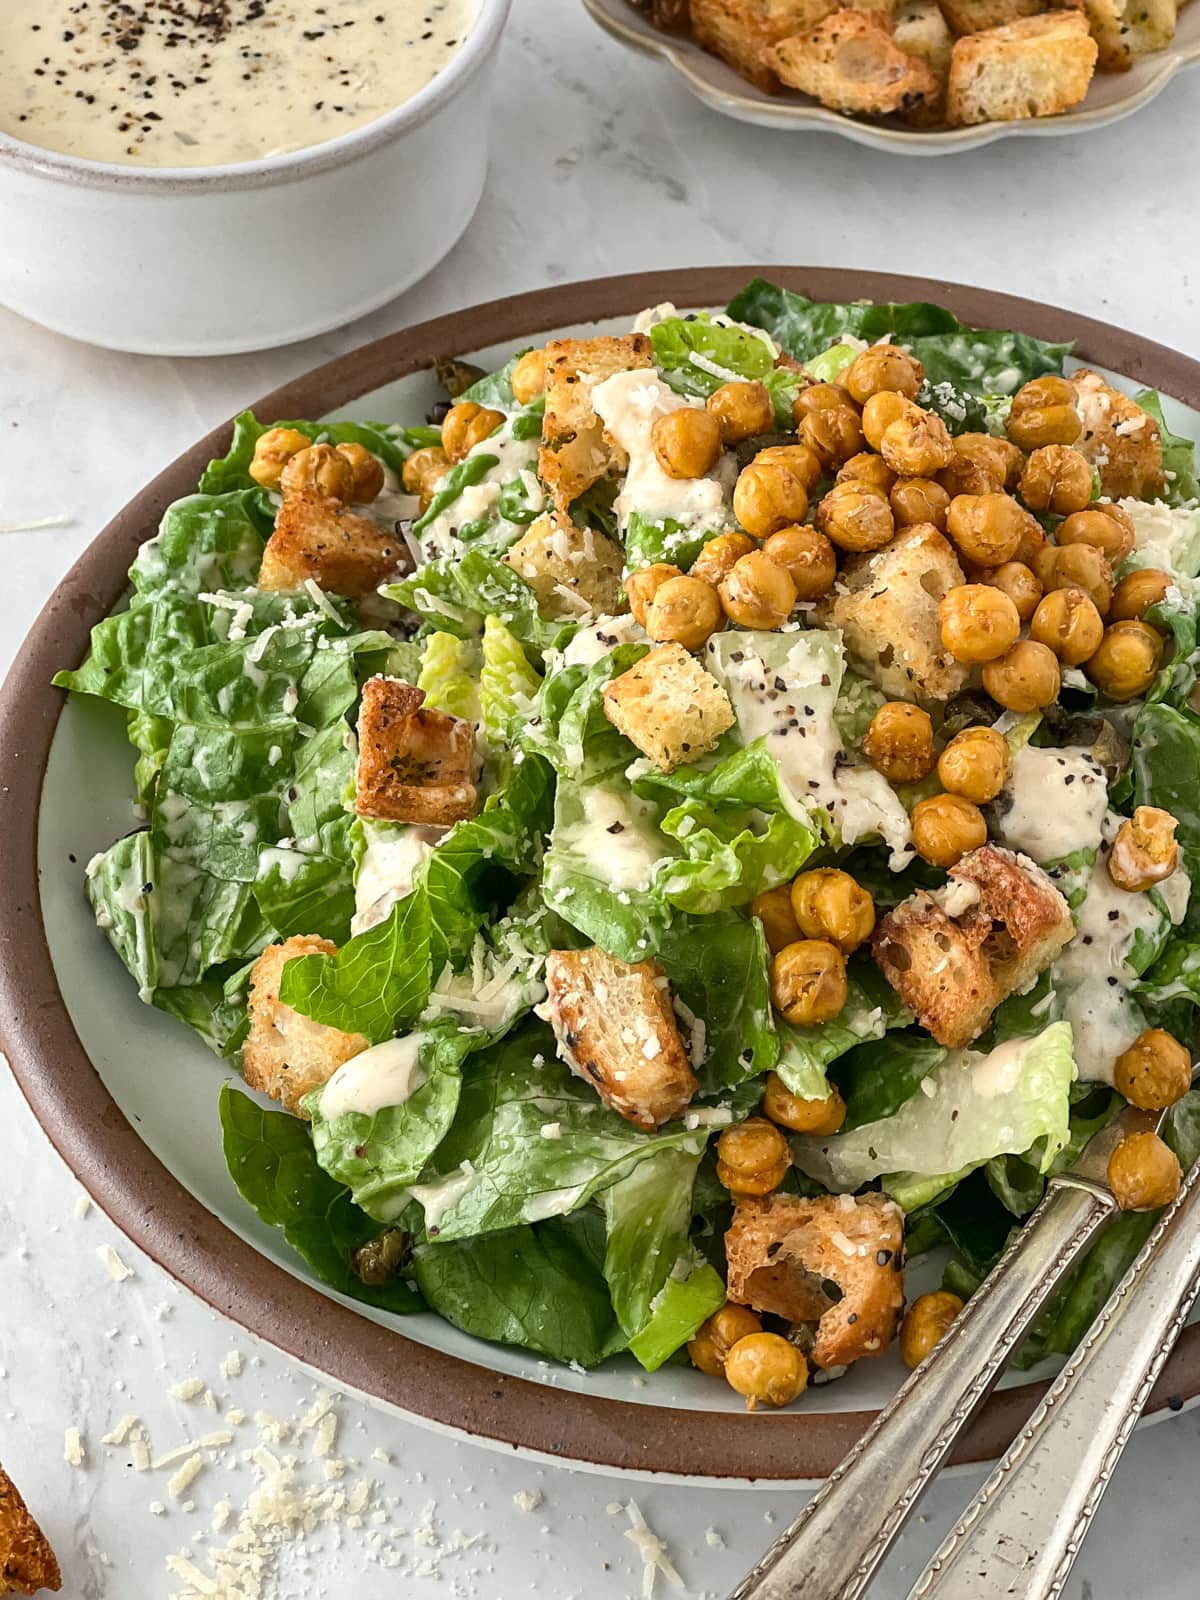 Plateful of caesar salad topped with croutons, crispy chickpeas and dripping with creamy vegan caesar dressing.